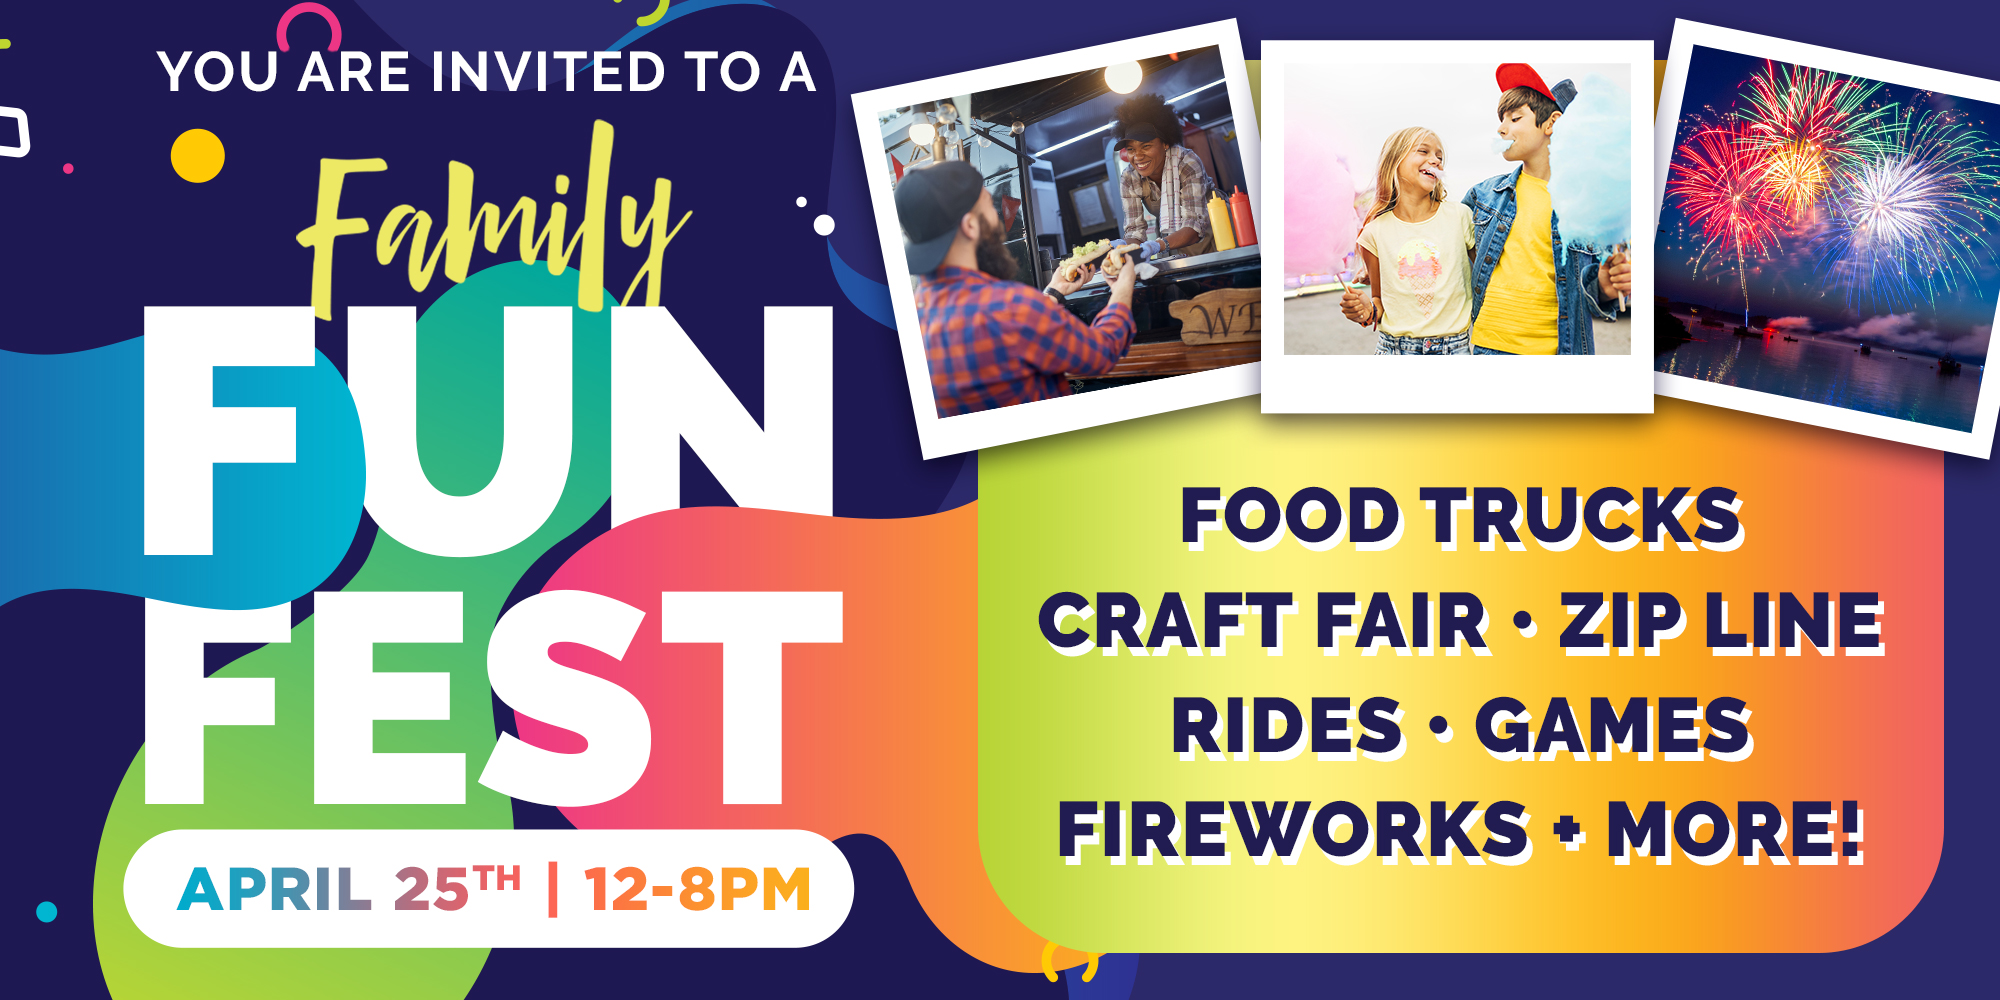 World Harvest Church Invites You to a Family Fun Fest April 11th 12- 8 Pm Food Trucks Craft Fair Zipline Rides Games Fireworks More! World Harvest Church 4595 Gender Road, Canal Winchester, Oh 43110